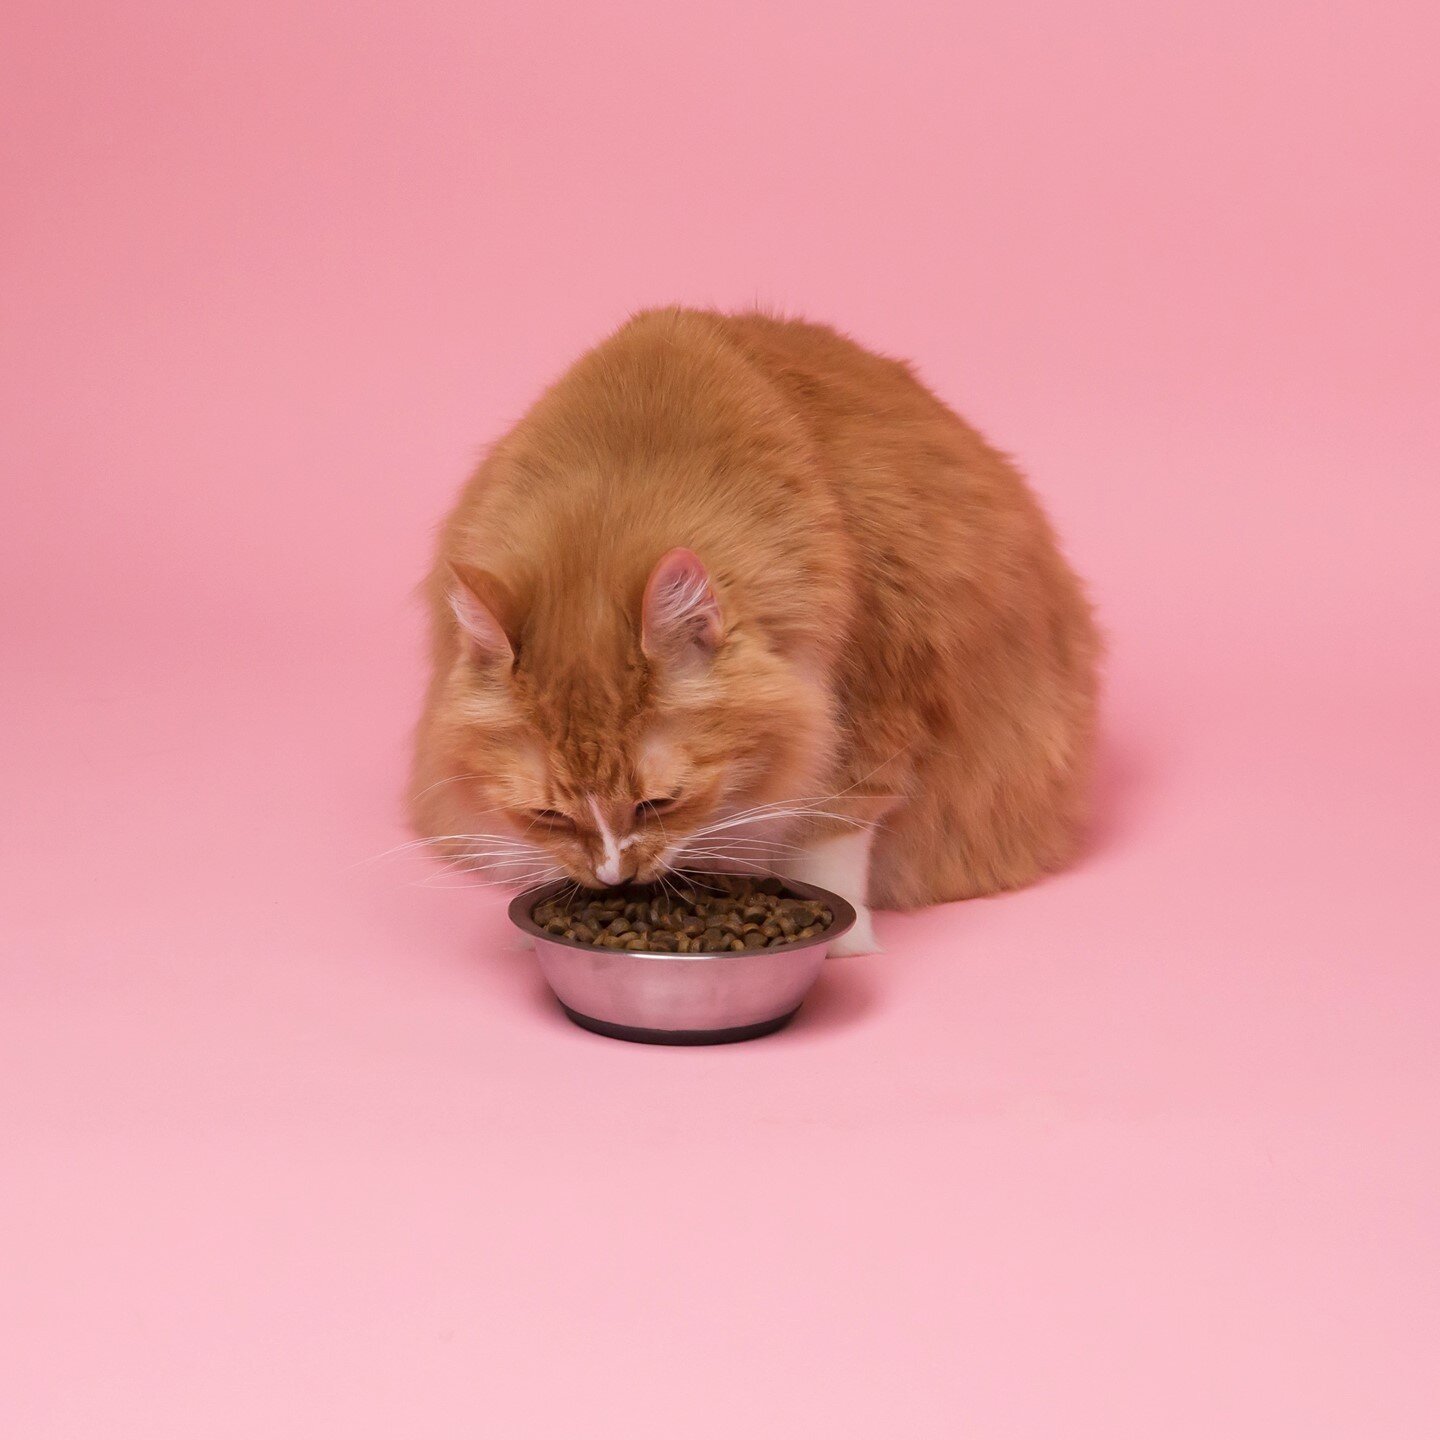 Nutrition Basics for Cats and Dogs

Read More Here: https://1l.ink/T22GM56

#SonoraVeterinaryGroup #Sonora #Veterinarian #AnimalClinic #AnimalHospital #PetWellness #PetDentistry #PetSurgery